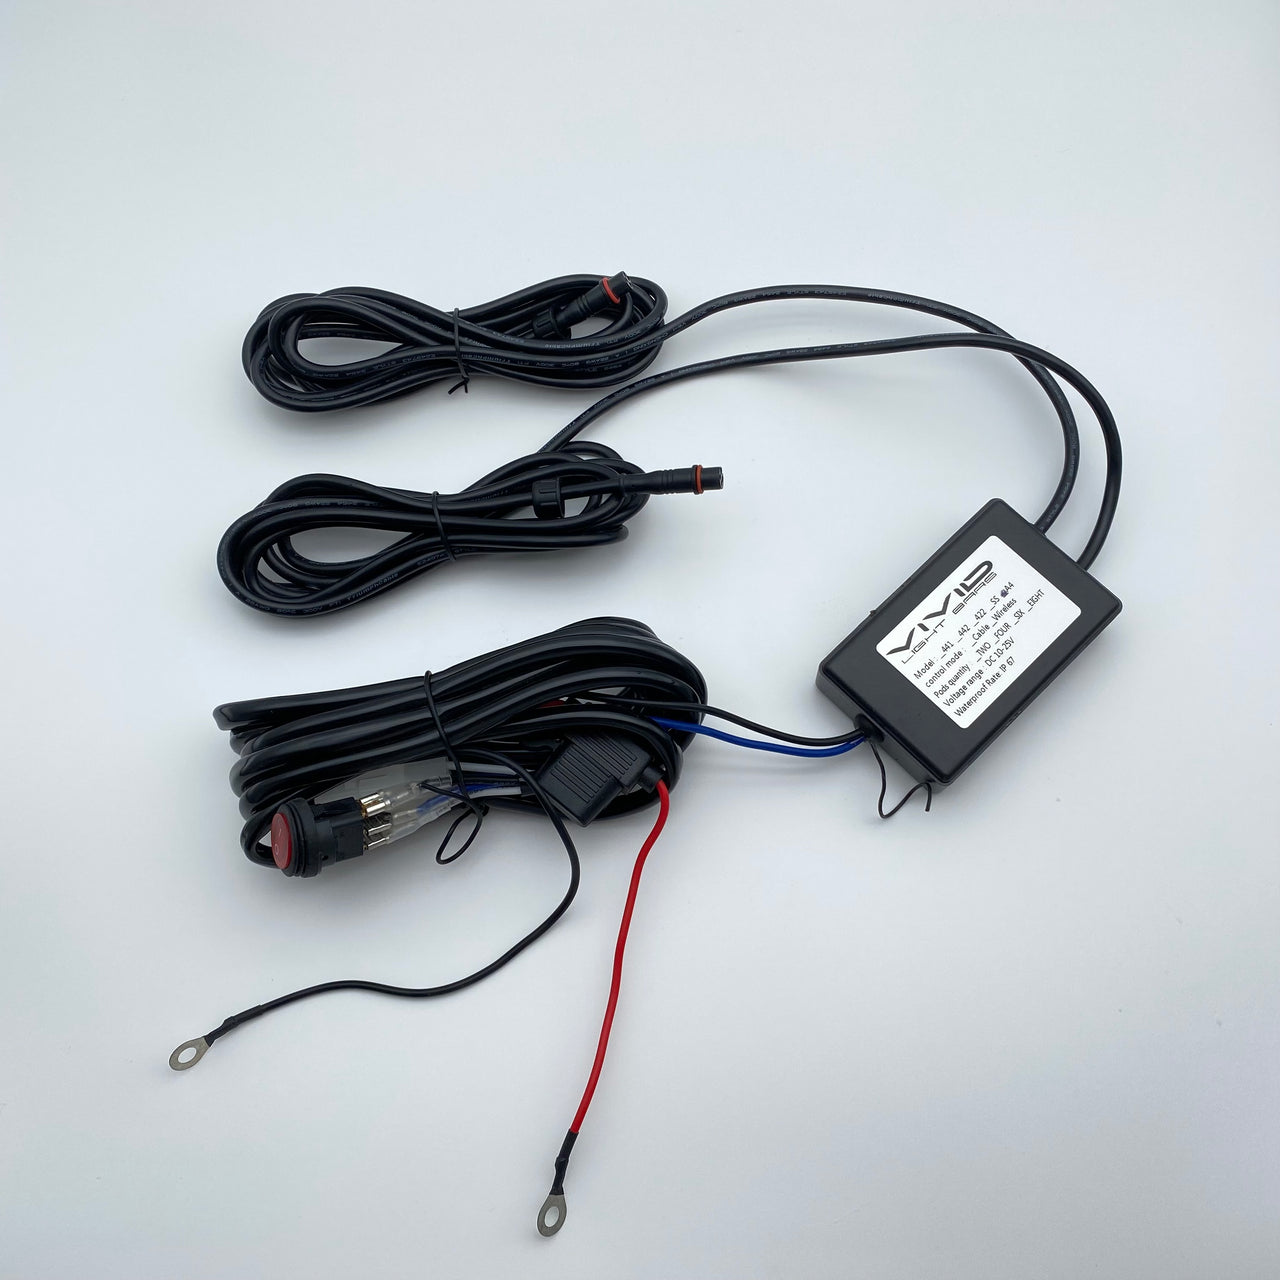 Newest Upgrade Alternate Flash Wireless/pre-wired Remote Controller Wiring Harness for LED Pods